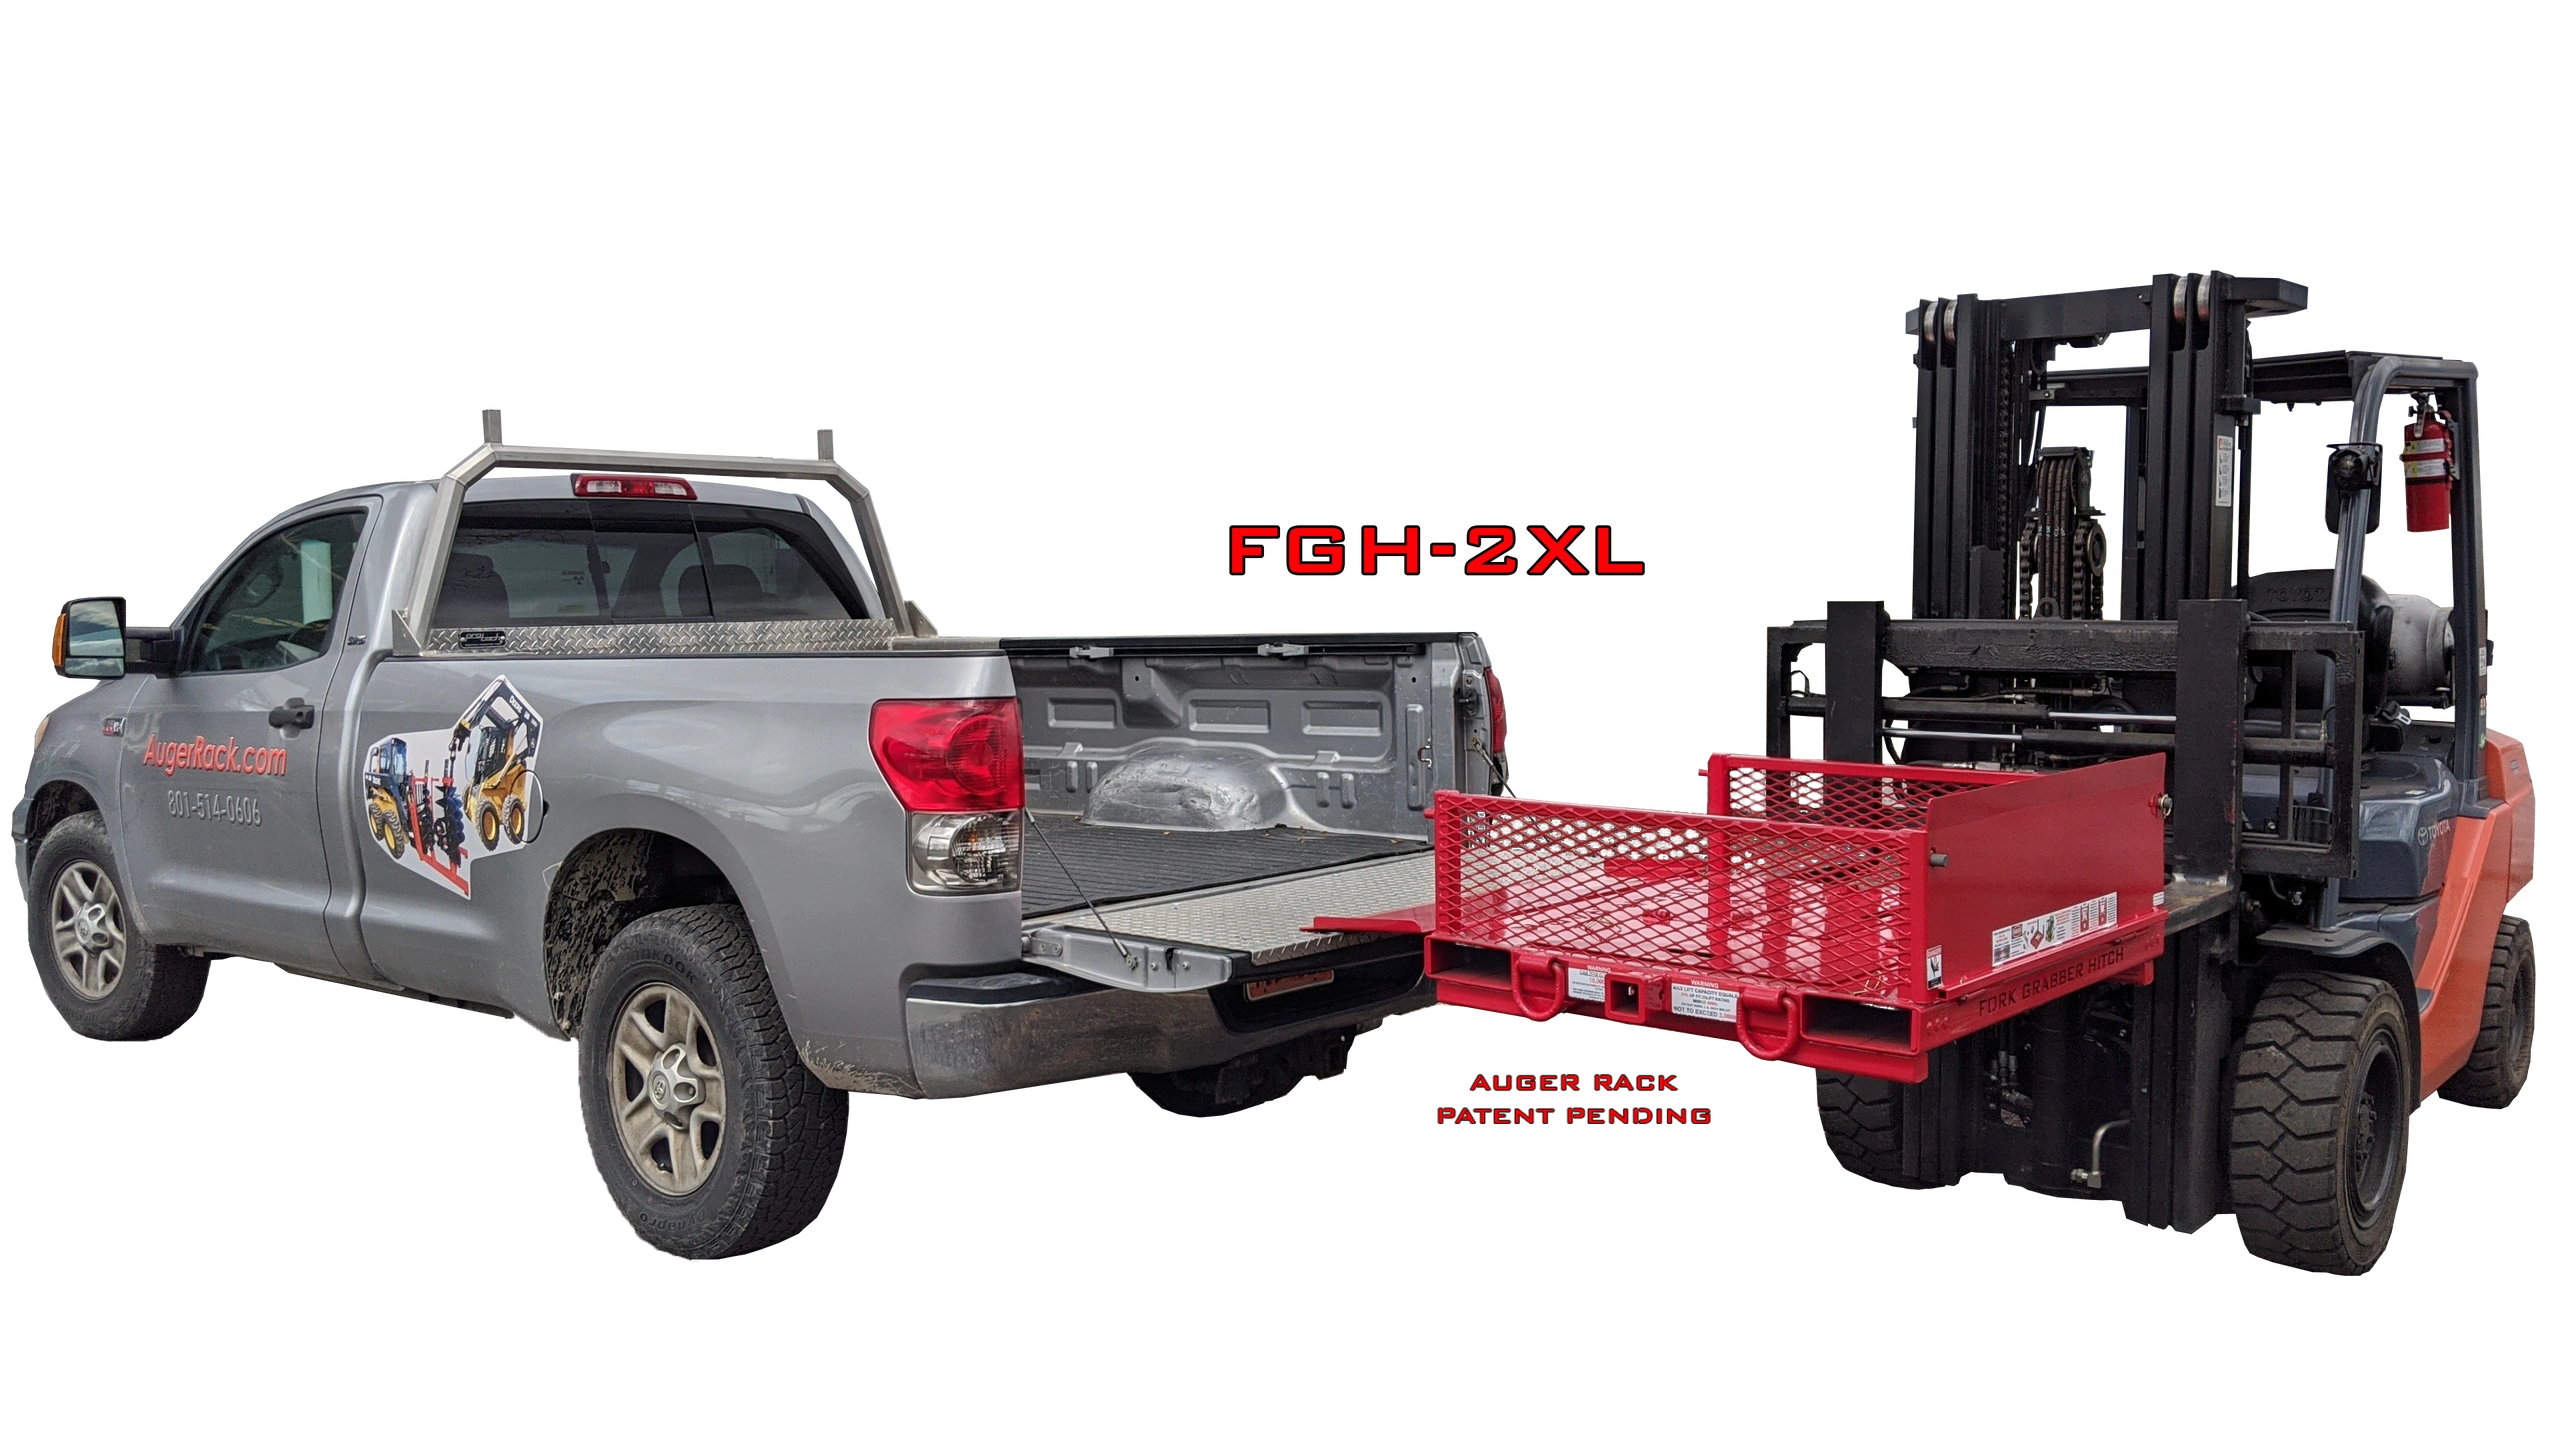 FGH-2XL Fork Grabber Hitch forklift attachment in use next to a truck with its tailgate down